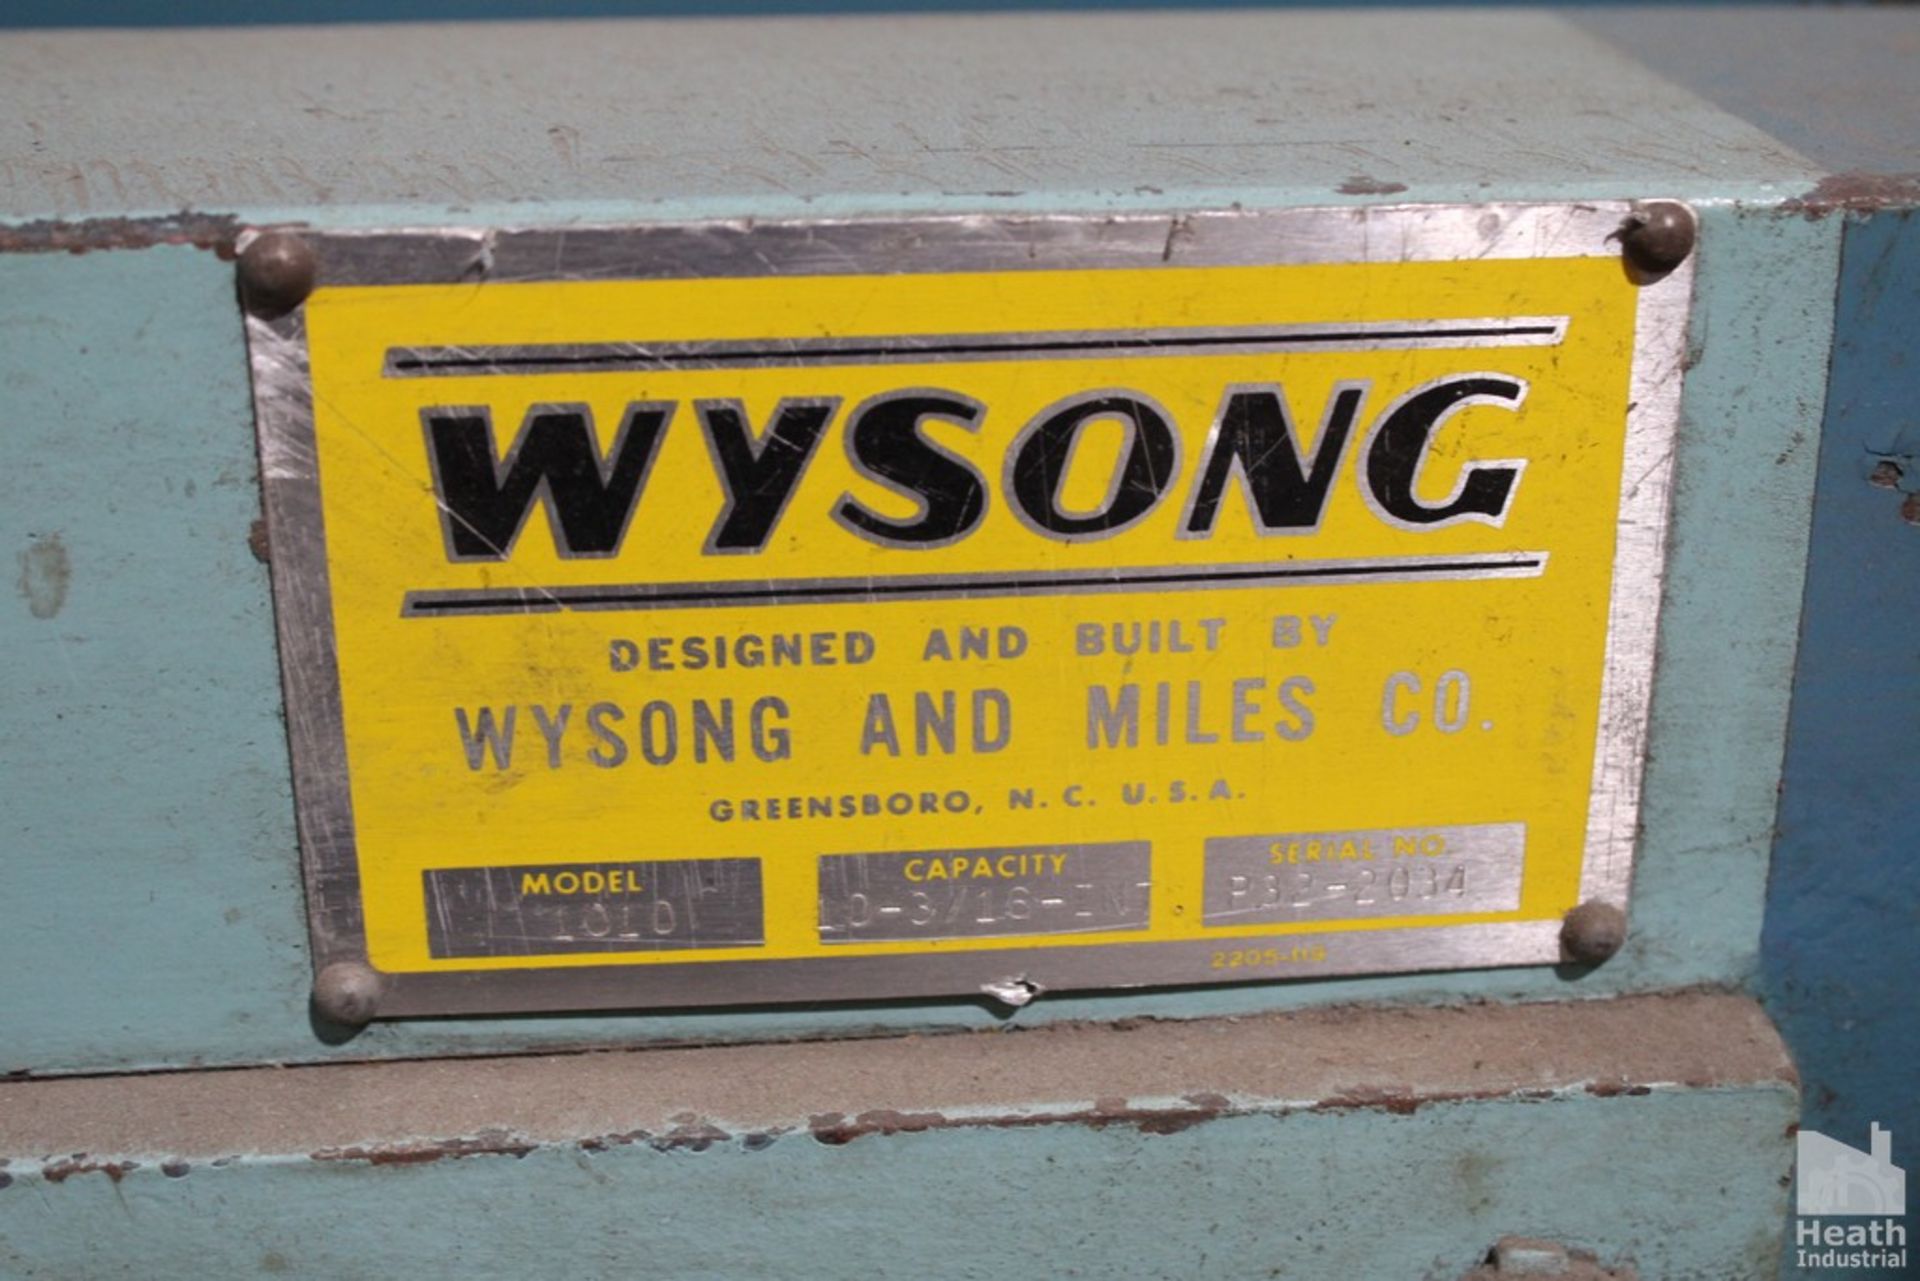 WYSONG 3/16” X 10’ MODEL 1010 SHEAR, S/N P32-2034. WITH MODEL PC100 SHEAR BACK GAUSE, 108” - Image 6 of 6